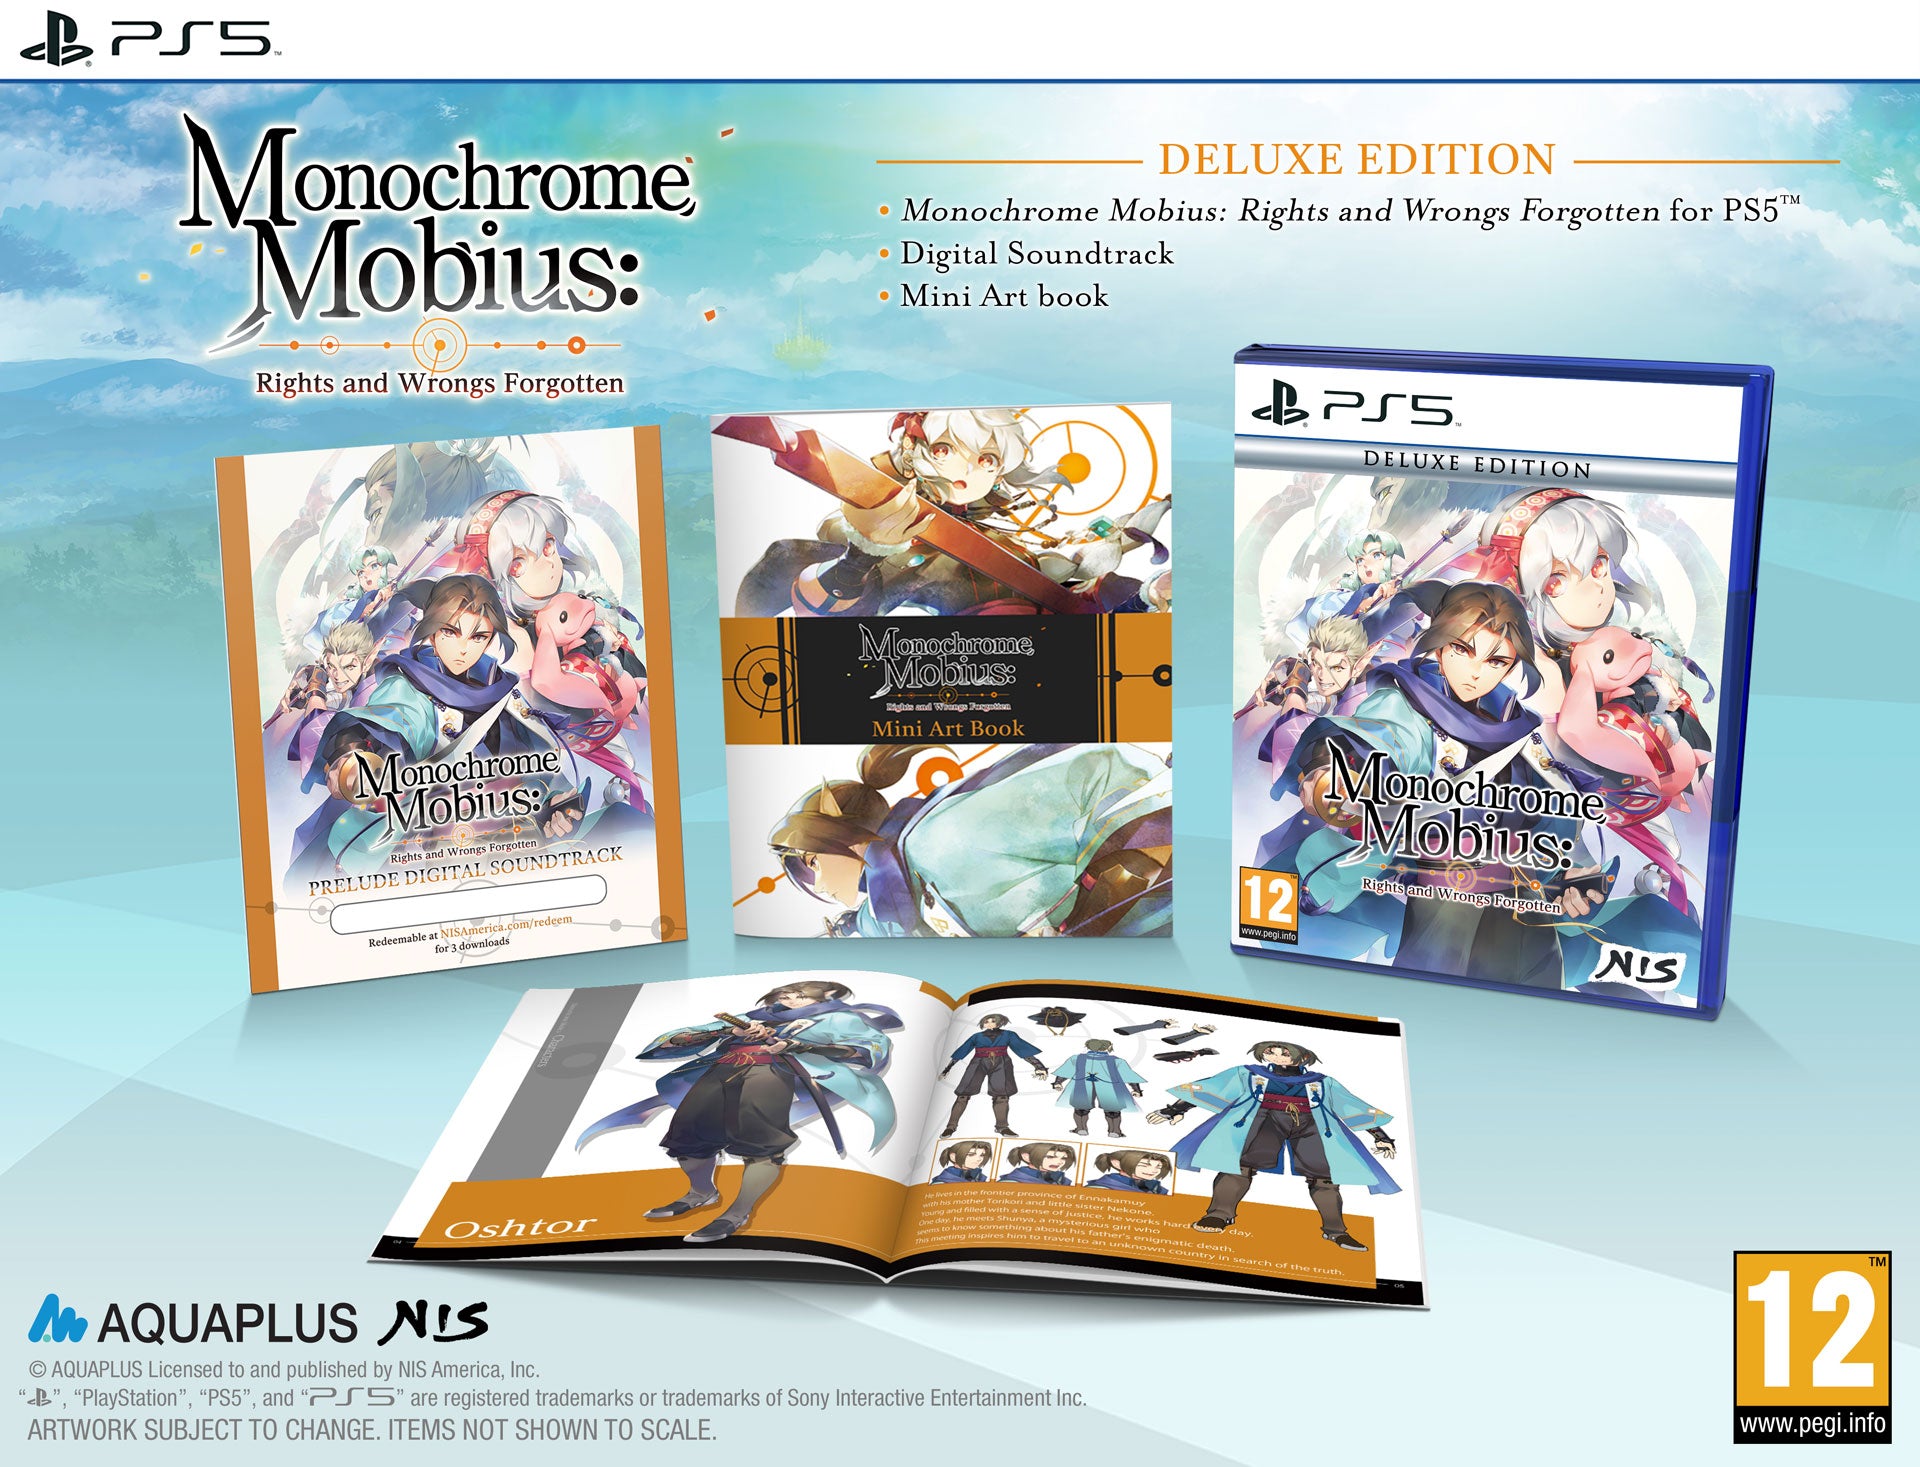 Monochrome Mobius: Rights and Wrongs Forgotten - Deluxe Edition - PS5®